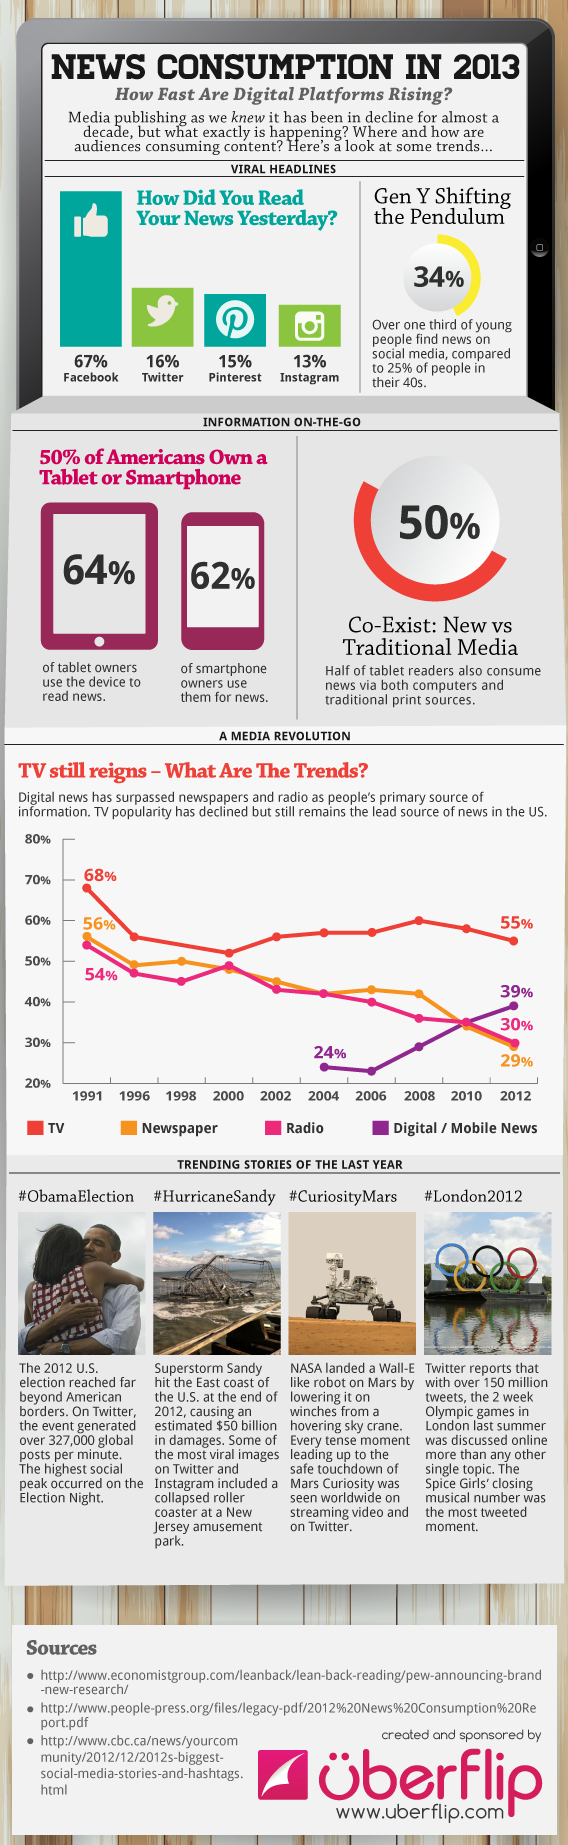 news consumption in 2013